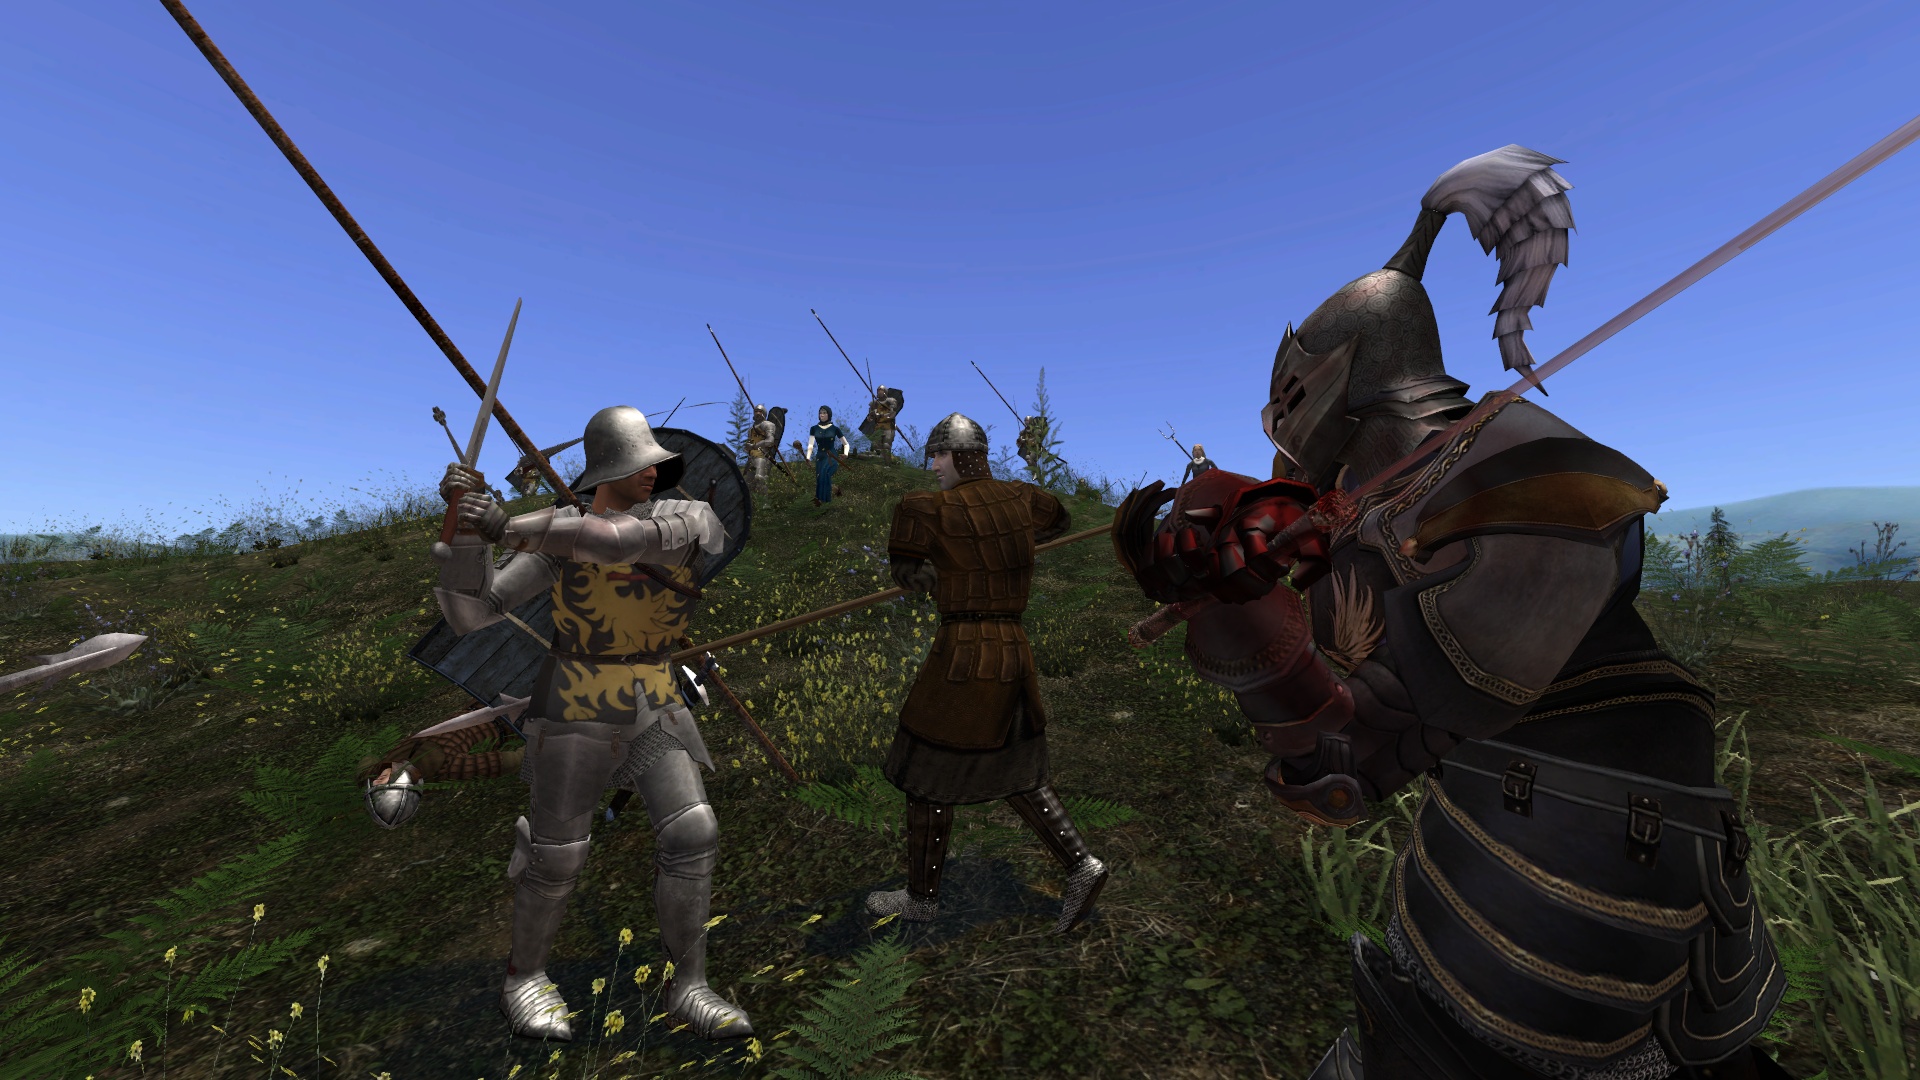 View the Mod DB A New Dawn mod for Mount & Blade: Warband image Ba...